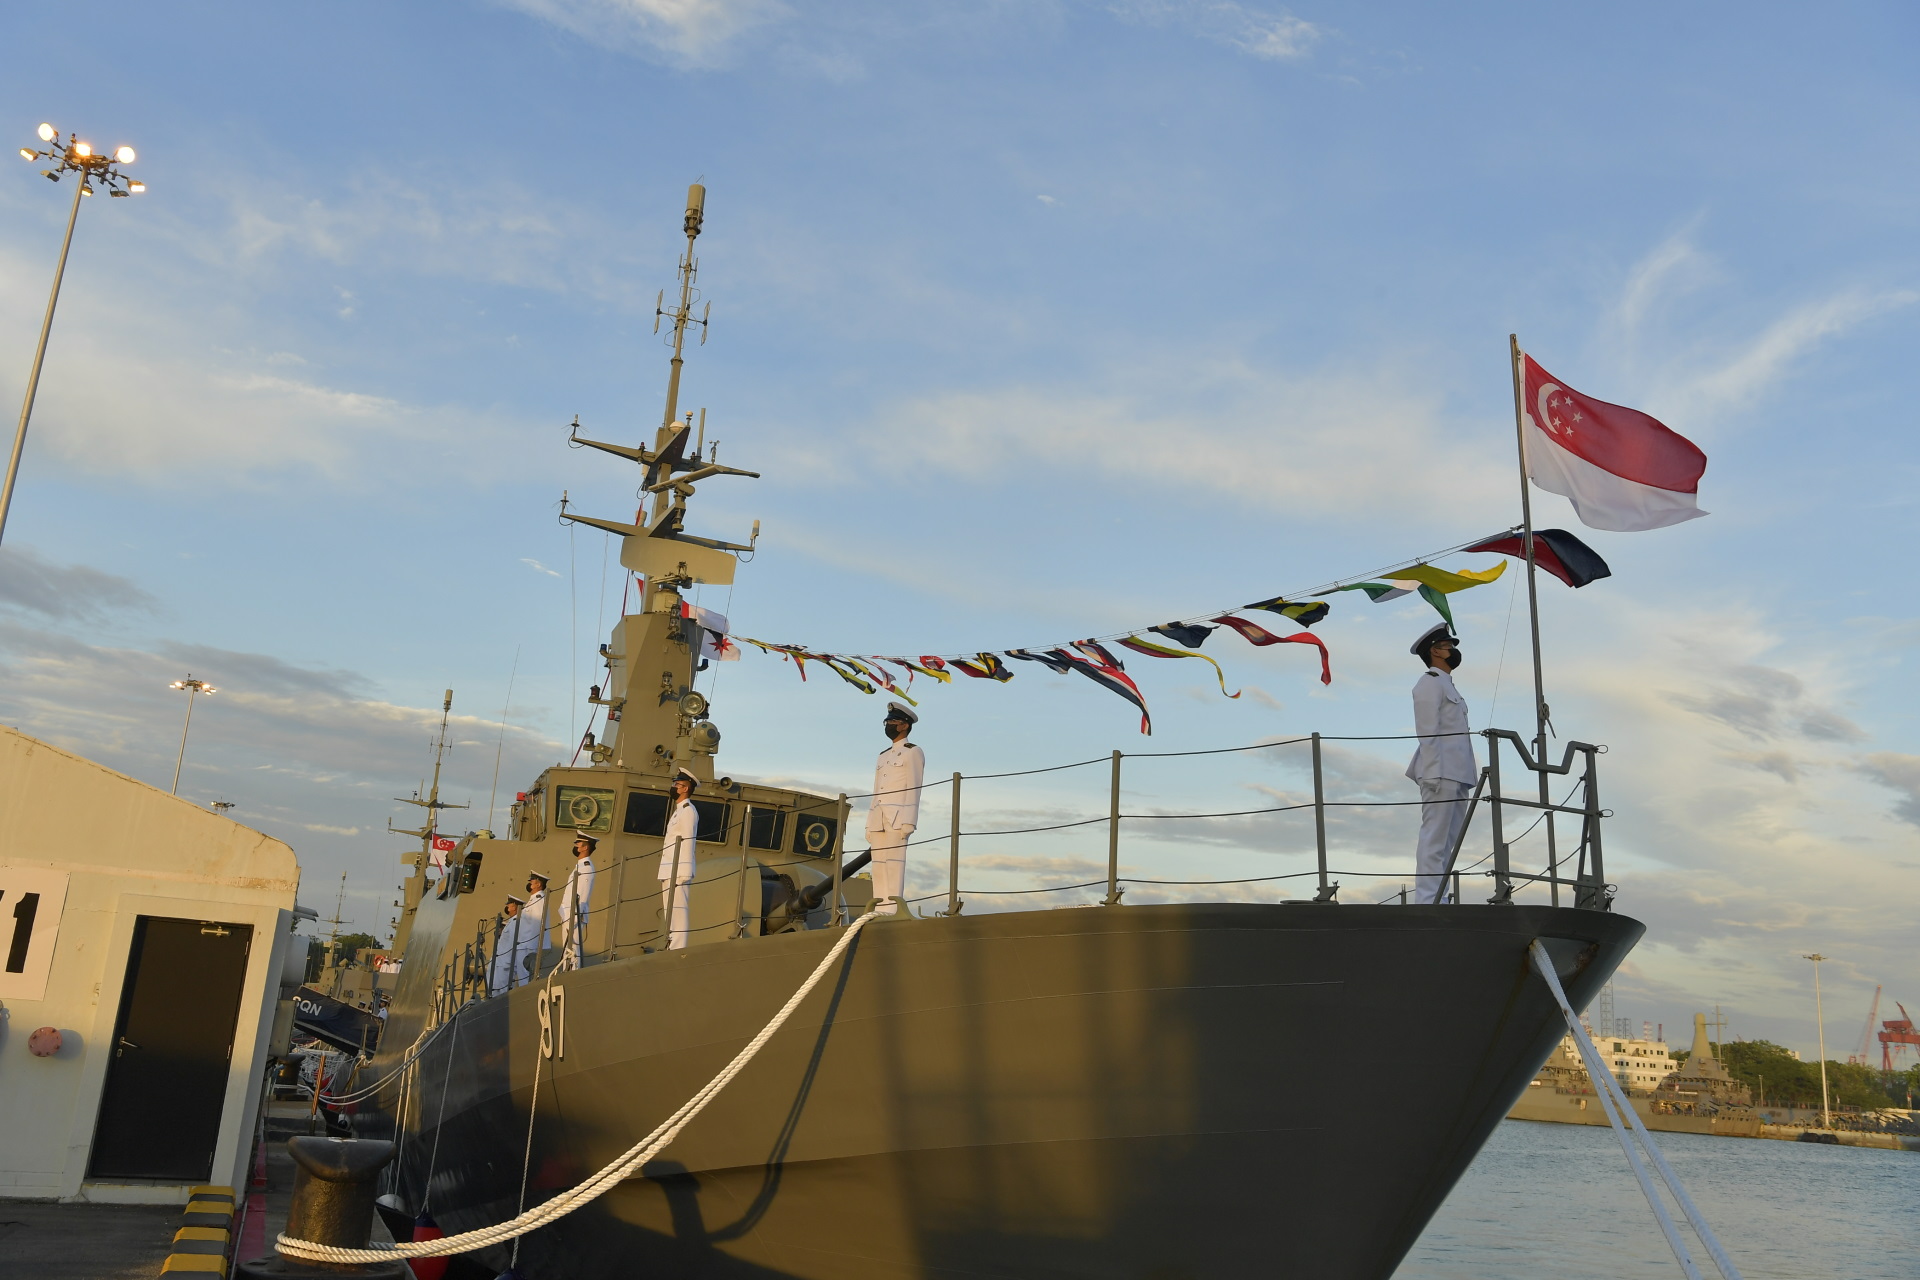 The crew of The Republic of Singapore Navy (RSN) Patrol Vessel, RSS Gallant, lining the ship during the sunset decommissioning ceremony at Tuas Naval Base on 11 Dec.